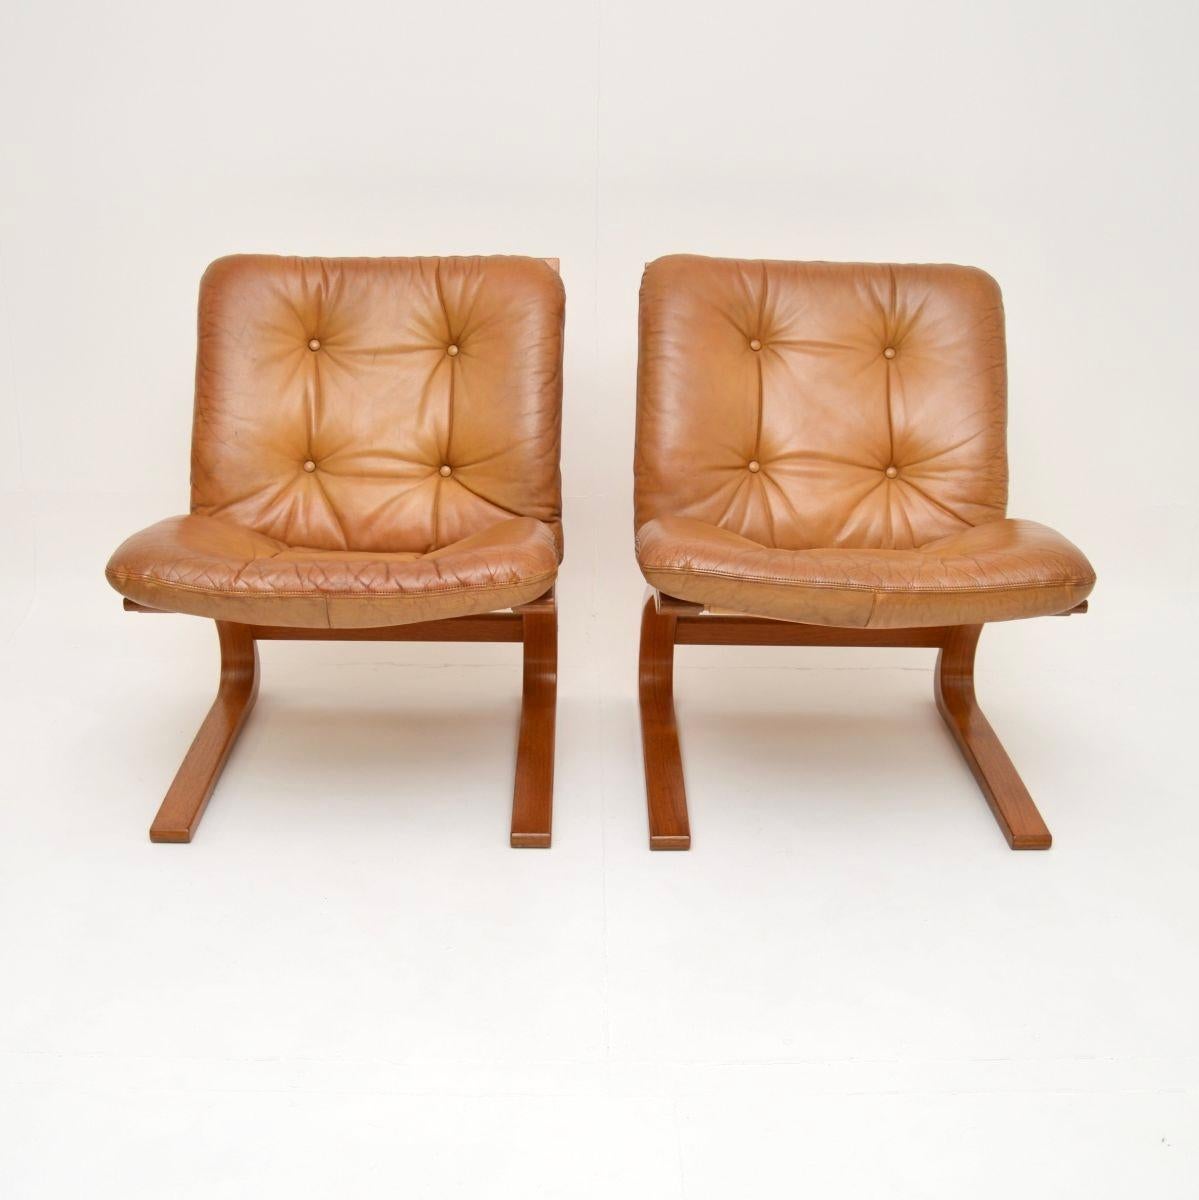 A stylish and extremely comfortable pair of vintage leather Kengu chairs by Elsa and Nordahl Solheim for Rykken. They were made in Norway, they date from the 1970’s.

The quality is exceptional, they are beautifully designed and are really, really